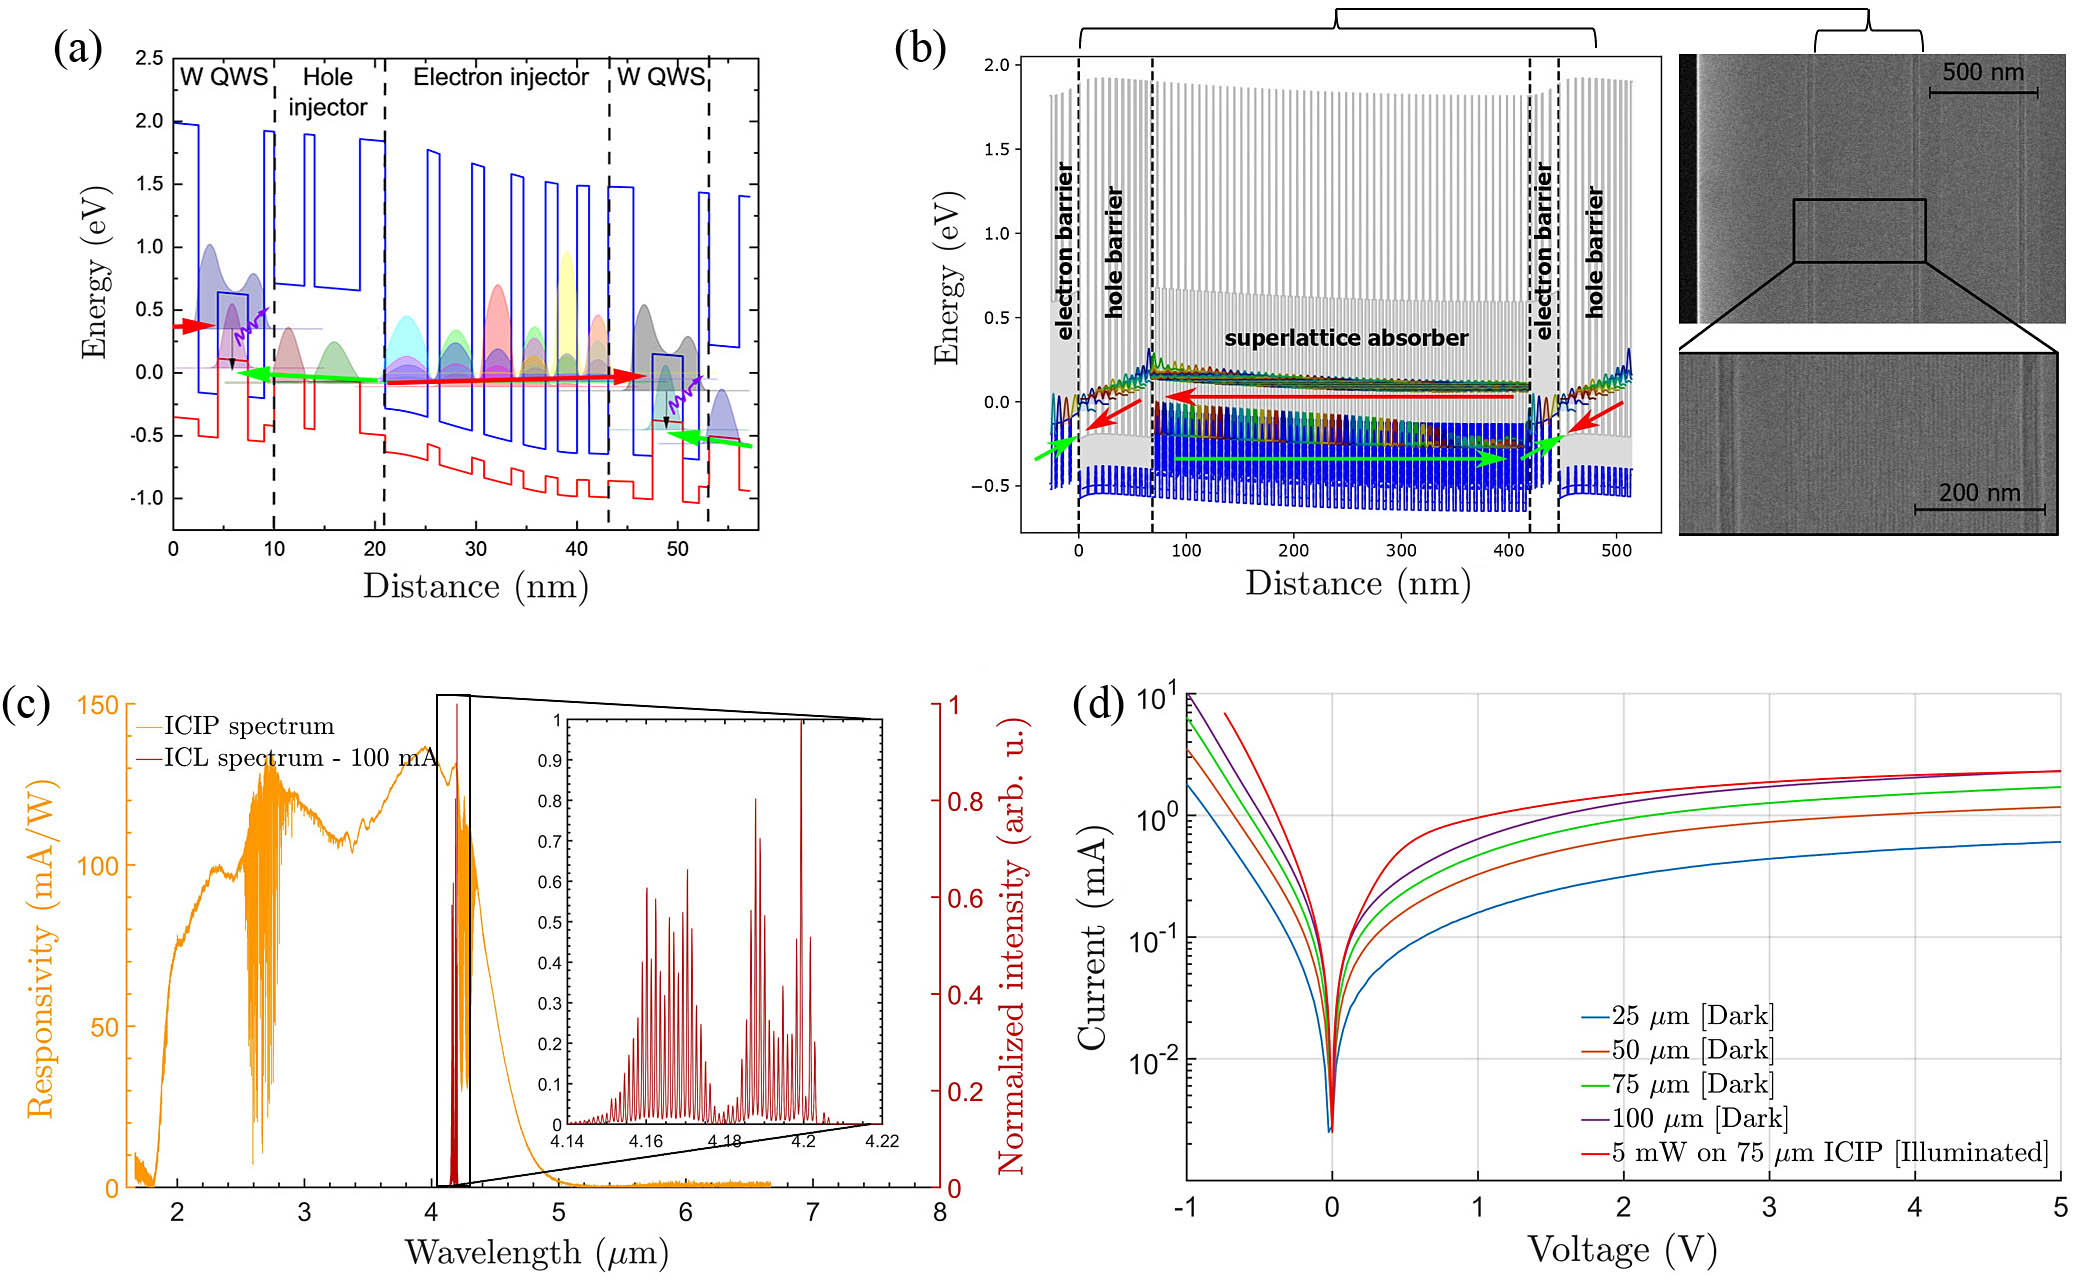 Characteristics of cascaded interband devices. (a) Calculated band alignment and probability density functions of one stage of the ICL active region for an internal electric field of 80 kV/cm and emission at 4.18 μm [45]. (b) Schematic representation of the band alignment and SEM picture of the heterostructure of the ICIP detector. (c) Measured responsivity of the ICIP under zero bias operation at room temperature (yellow curve) together with the normalized emission spectrum of the ICL at a temperature of 20°C and a drive current of 100 mA (red curve). The detector is well suited for the emission wavelength of the source around 4.18 μm. The inset displays more precisely the emission spectrum of the ICL showing the multimode emission composed by two lobes located left and right of 4.18 μm. (d) Dark current density characterization for four different mesa sizes from 25 μm to 100 μm. With a 4.5 V bias and at 20°C, the 75 μm ICIP shows a dark current of 1.6 mA. When illuminated by the 5 mW ICL beam, the photocurrent is around 2.3 mA.